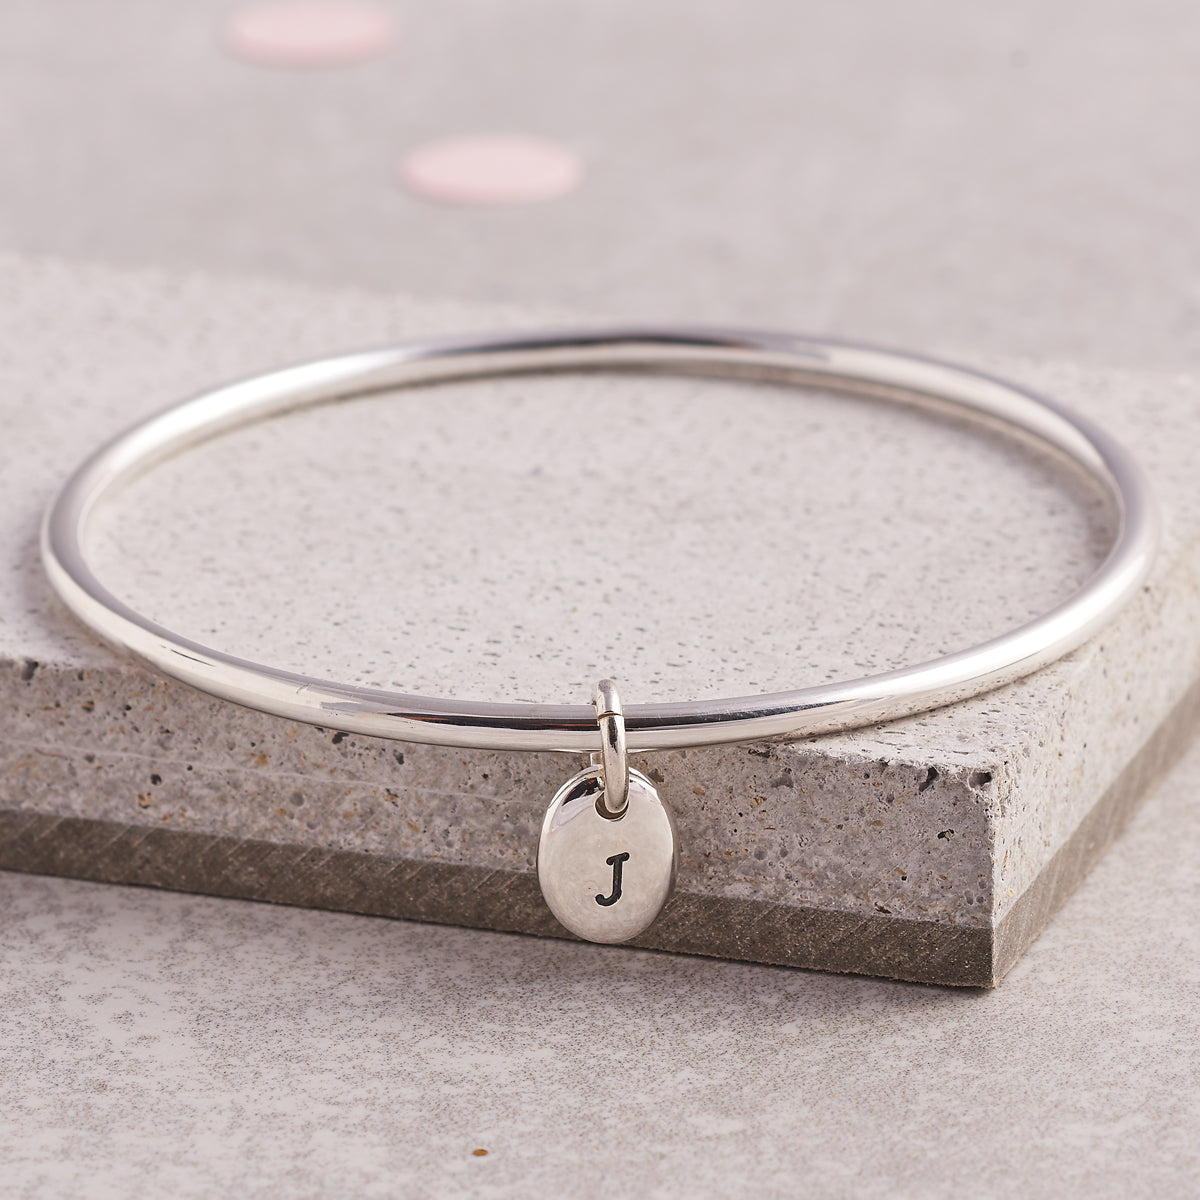 Personalised Pebble Silver Charm Bangle engraved with initial J